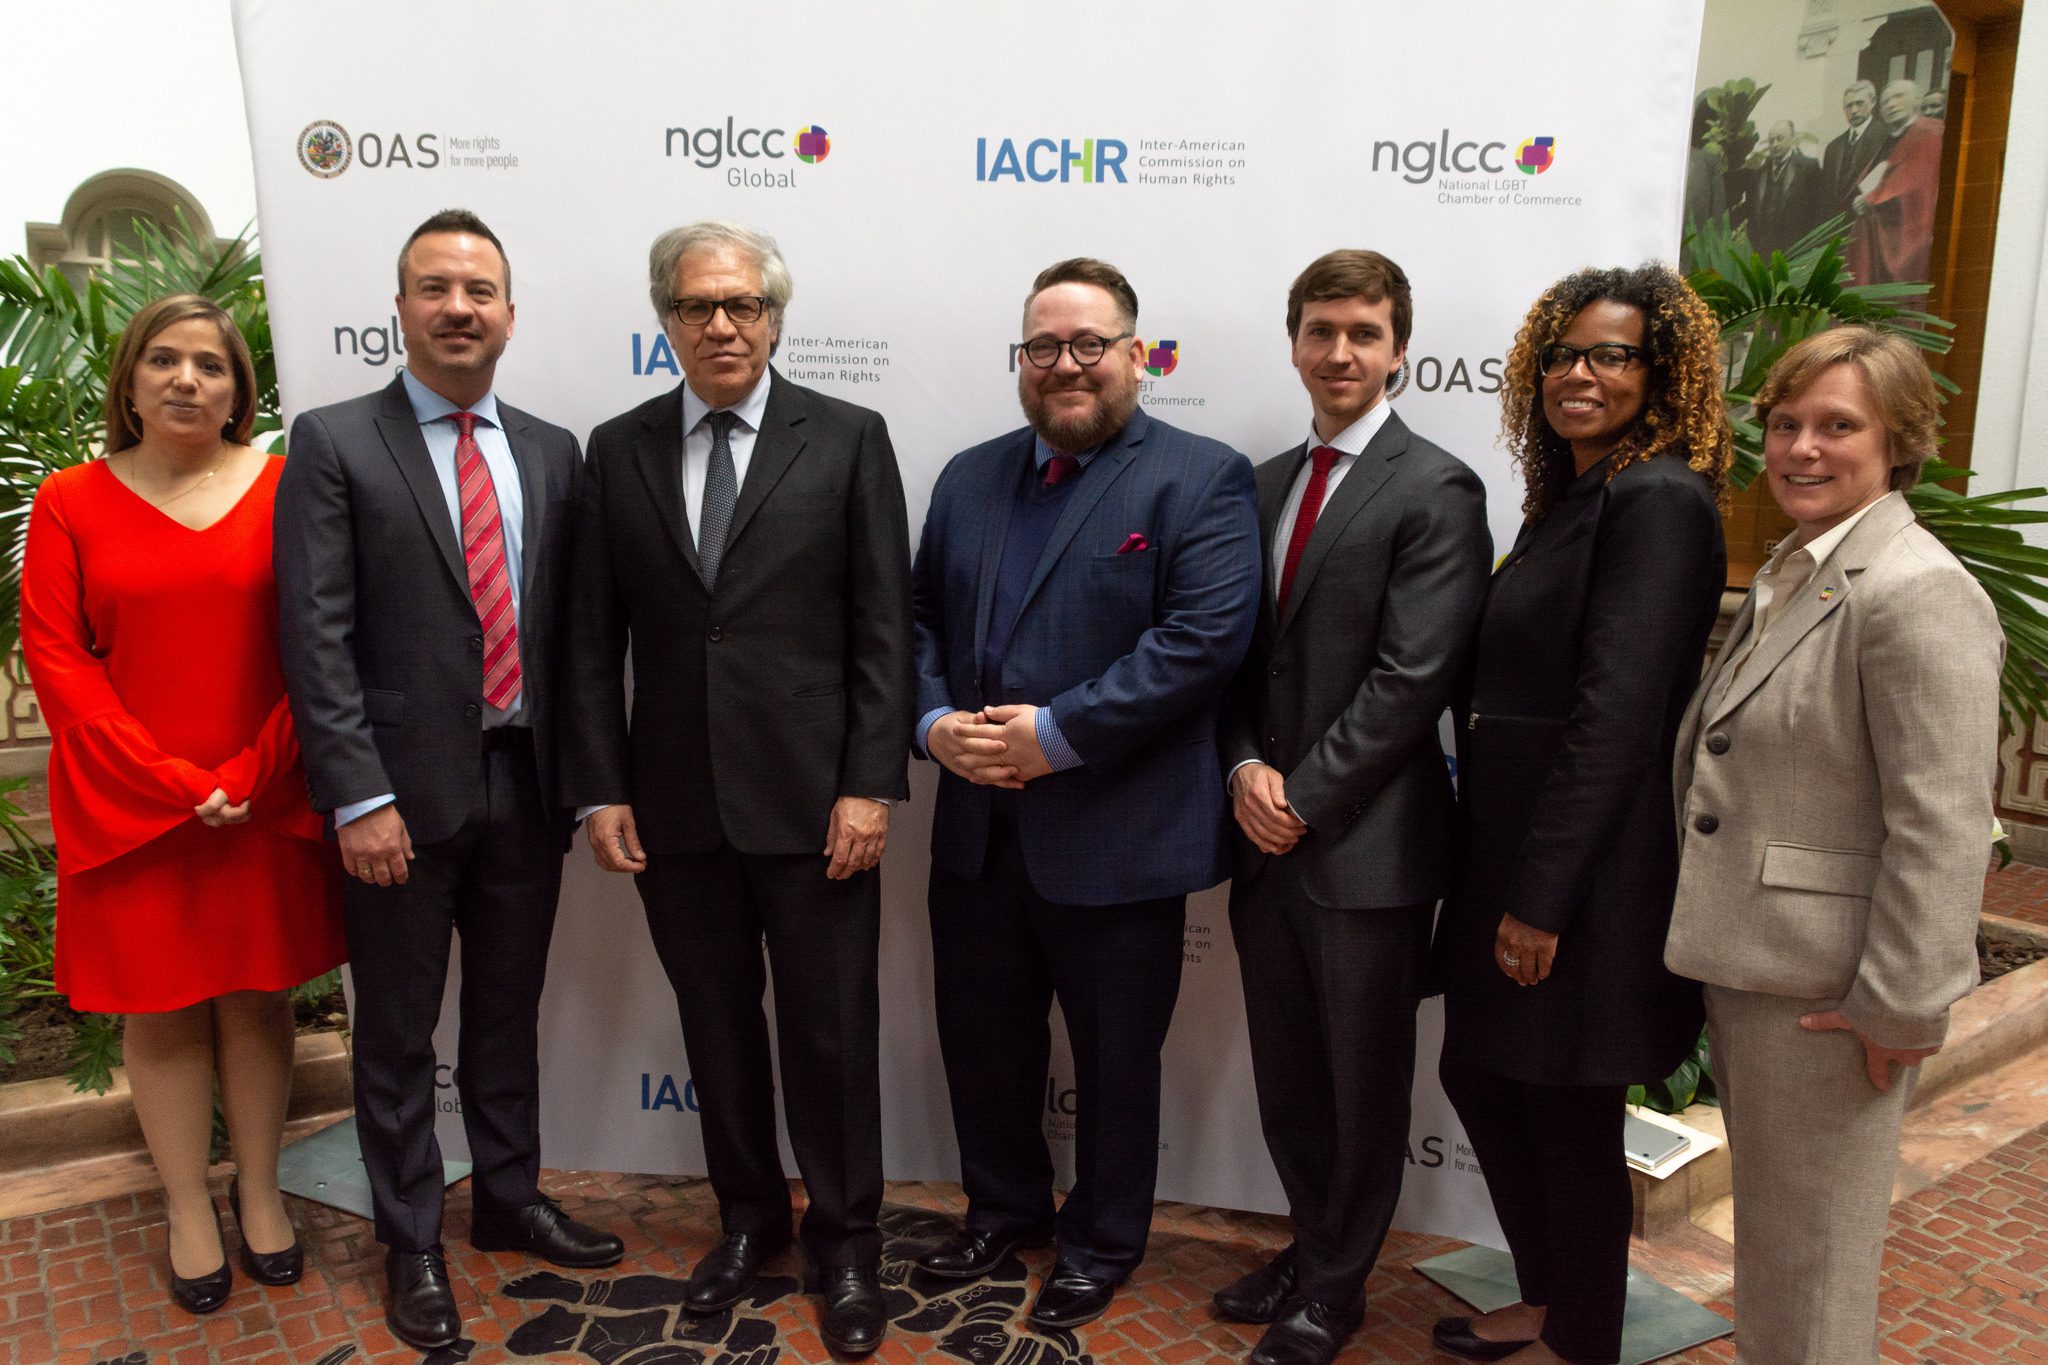 From left to right: Dr. Betilde-Muñoz-Pogossian, Director of the Department of Social Inclusion, OAS; Chance Mitchell, Co-Founder & CEO, NGLCC; Luis Almagro, Secretary-General, OAS; Justin Nelson, Co-Founder & President, NGLCC; Phil Crehan, Director, NGLCC Global; Nedra Dickson, Global Supplier Diversity & Sustainability Lead, Accenture; Chris Crespo, Inclusiveness Director of the Americas Talent Team, EY